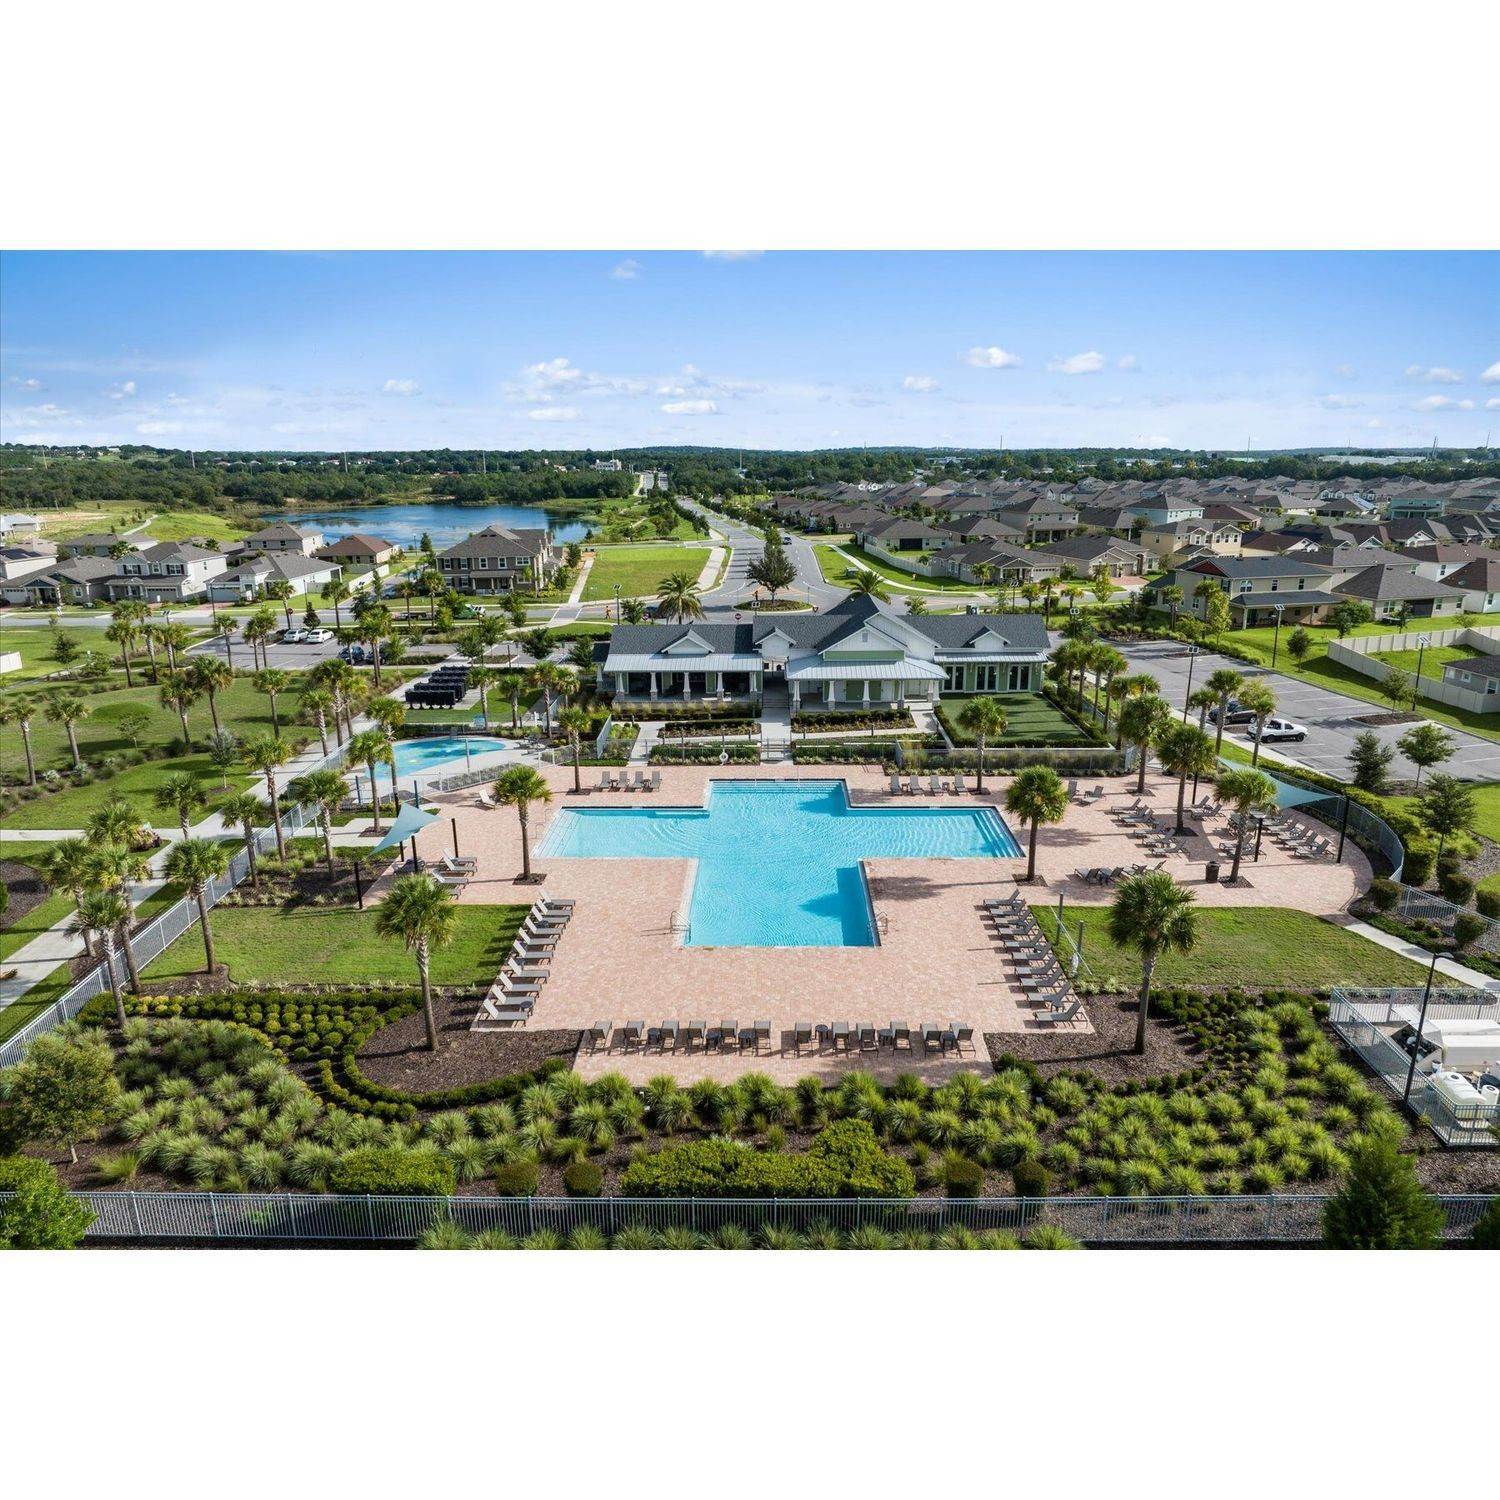 8. Waterbrooke bâtiment à 3029 Ambersweet Place, Clermont, FL 34711